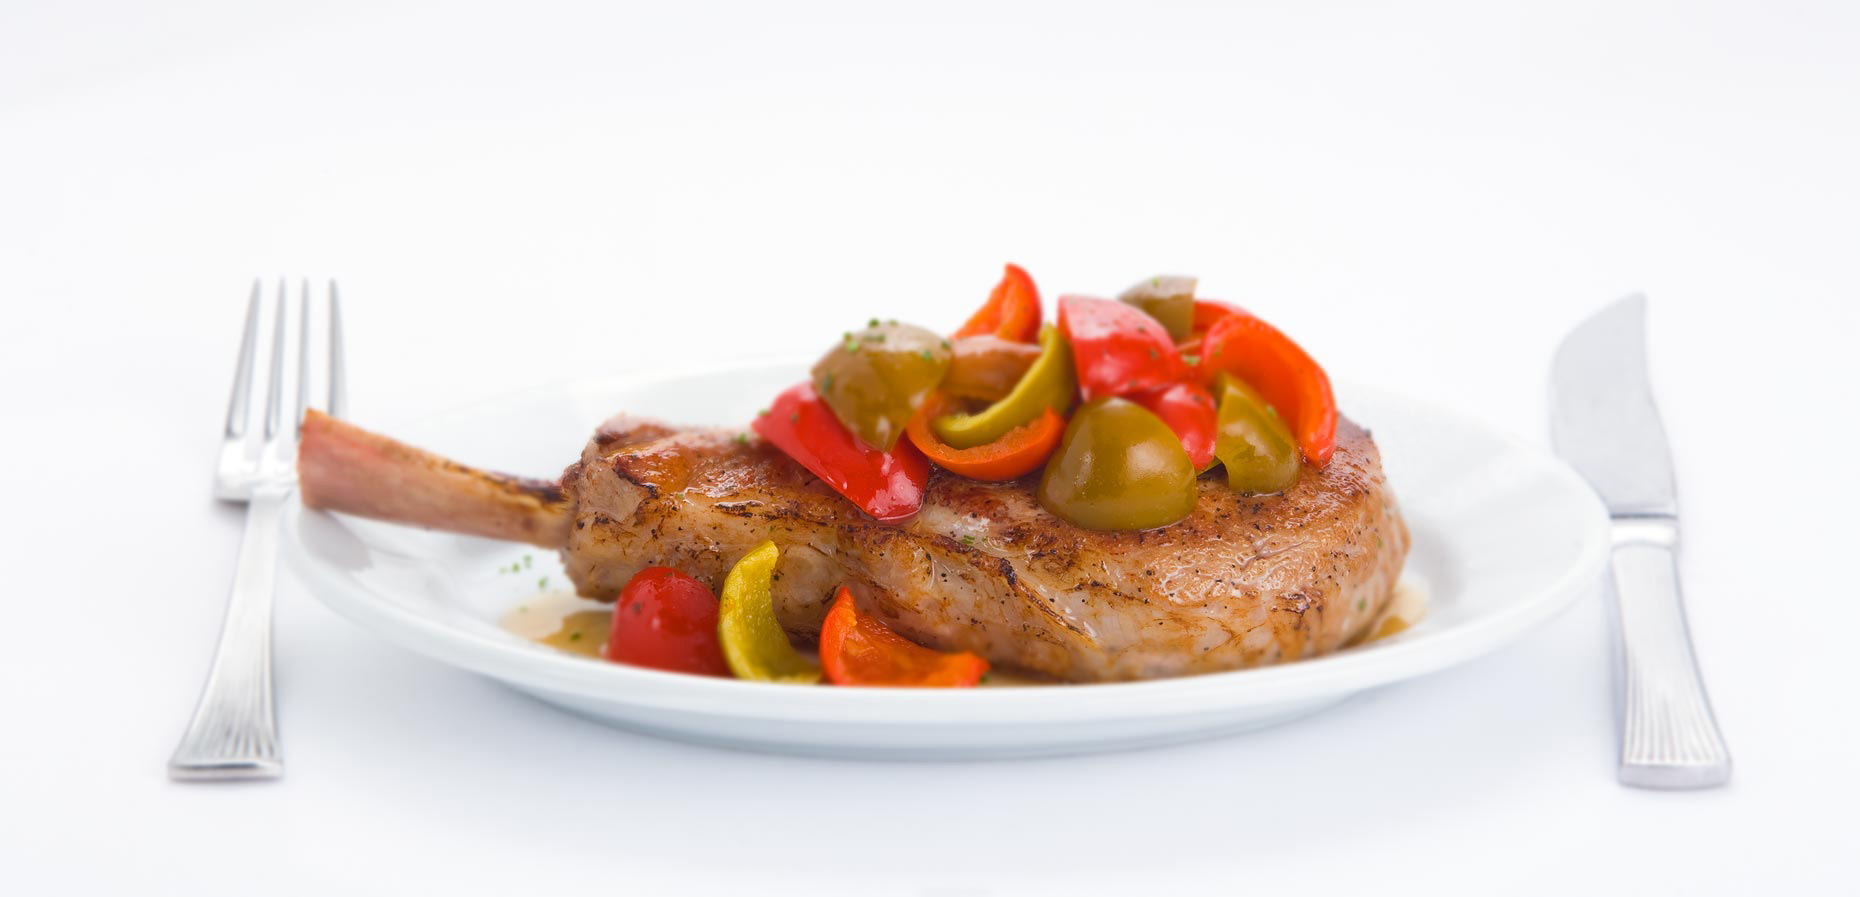 Food Photography | Ruths Chris Lamb Chop & Peppers